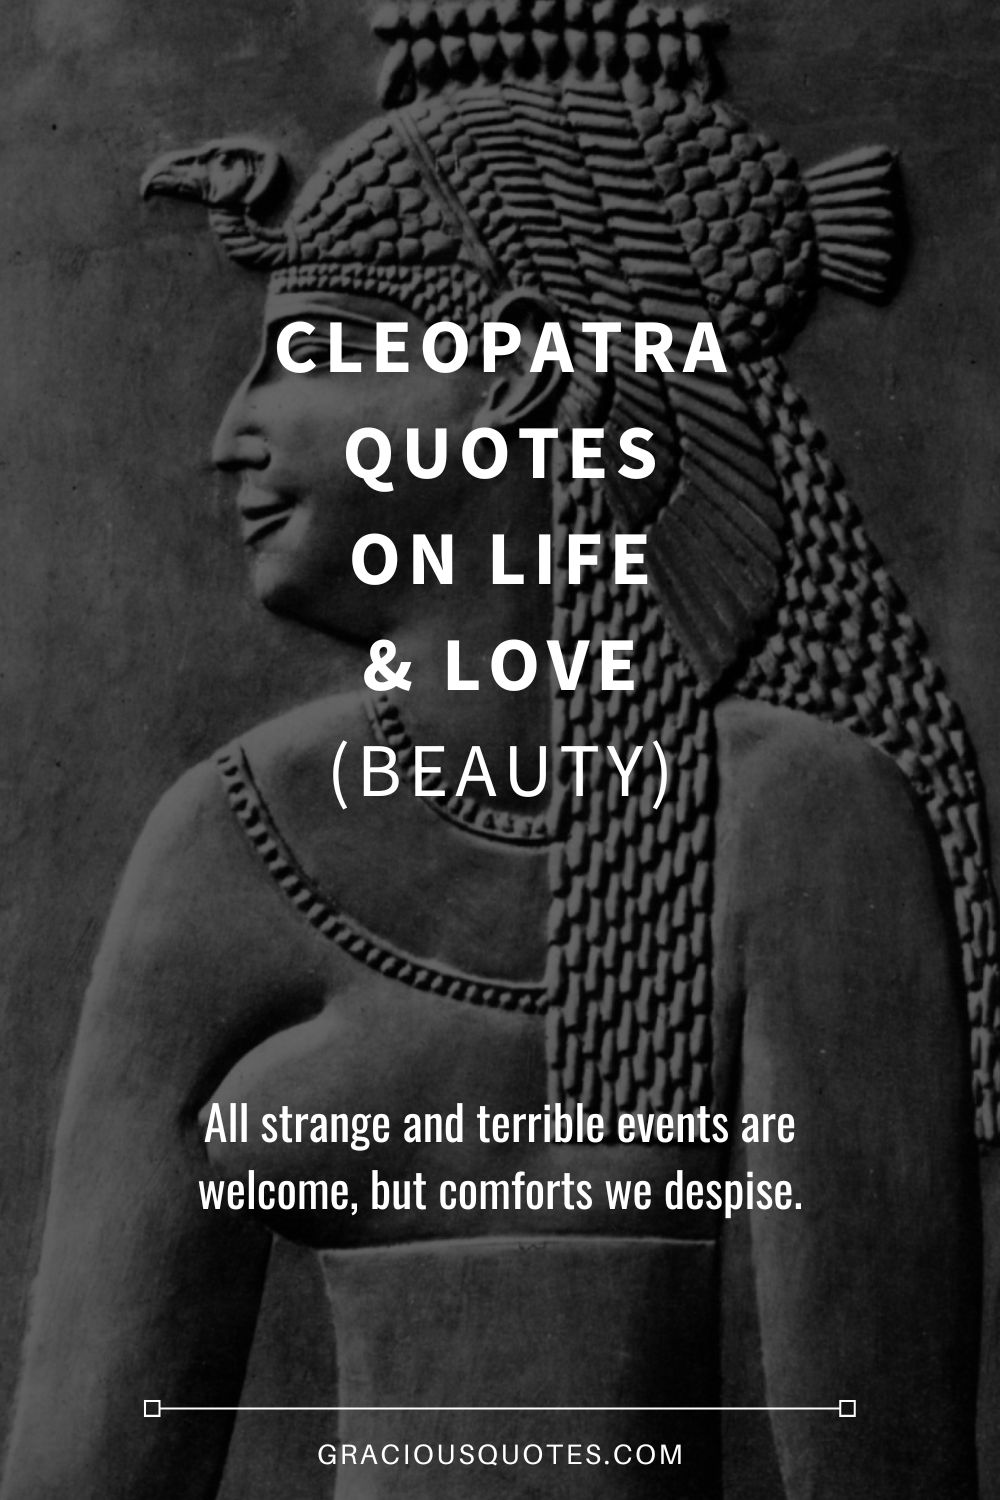 Cleopatra Quotes on Life & Love (BEAUTY) - Gracious Quotes